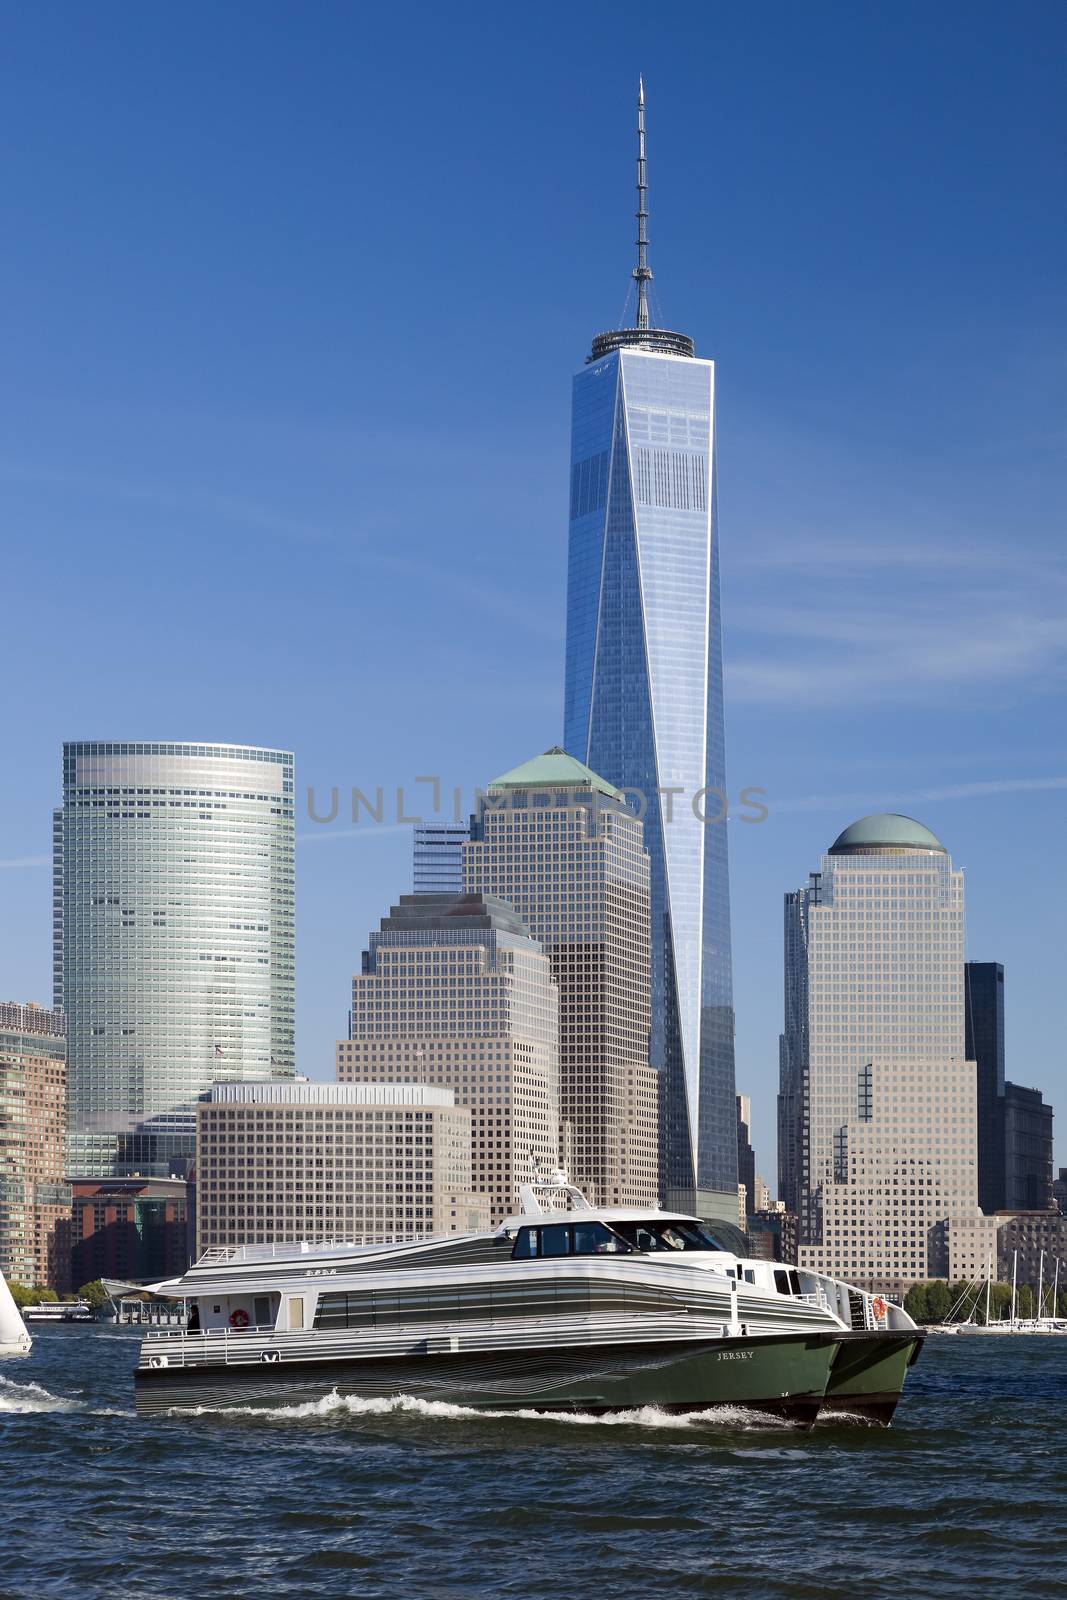 New York, USA - October 3, 2014: Freedom Tower in Lower Manhattan. One World Trade Center is the tallest building in the Western Hemisphere and the third-tallest building in the world.